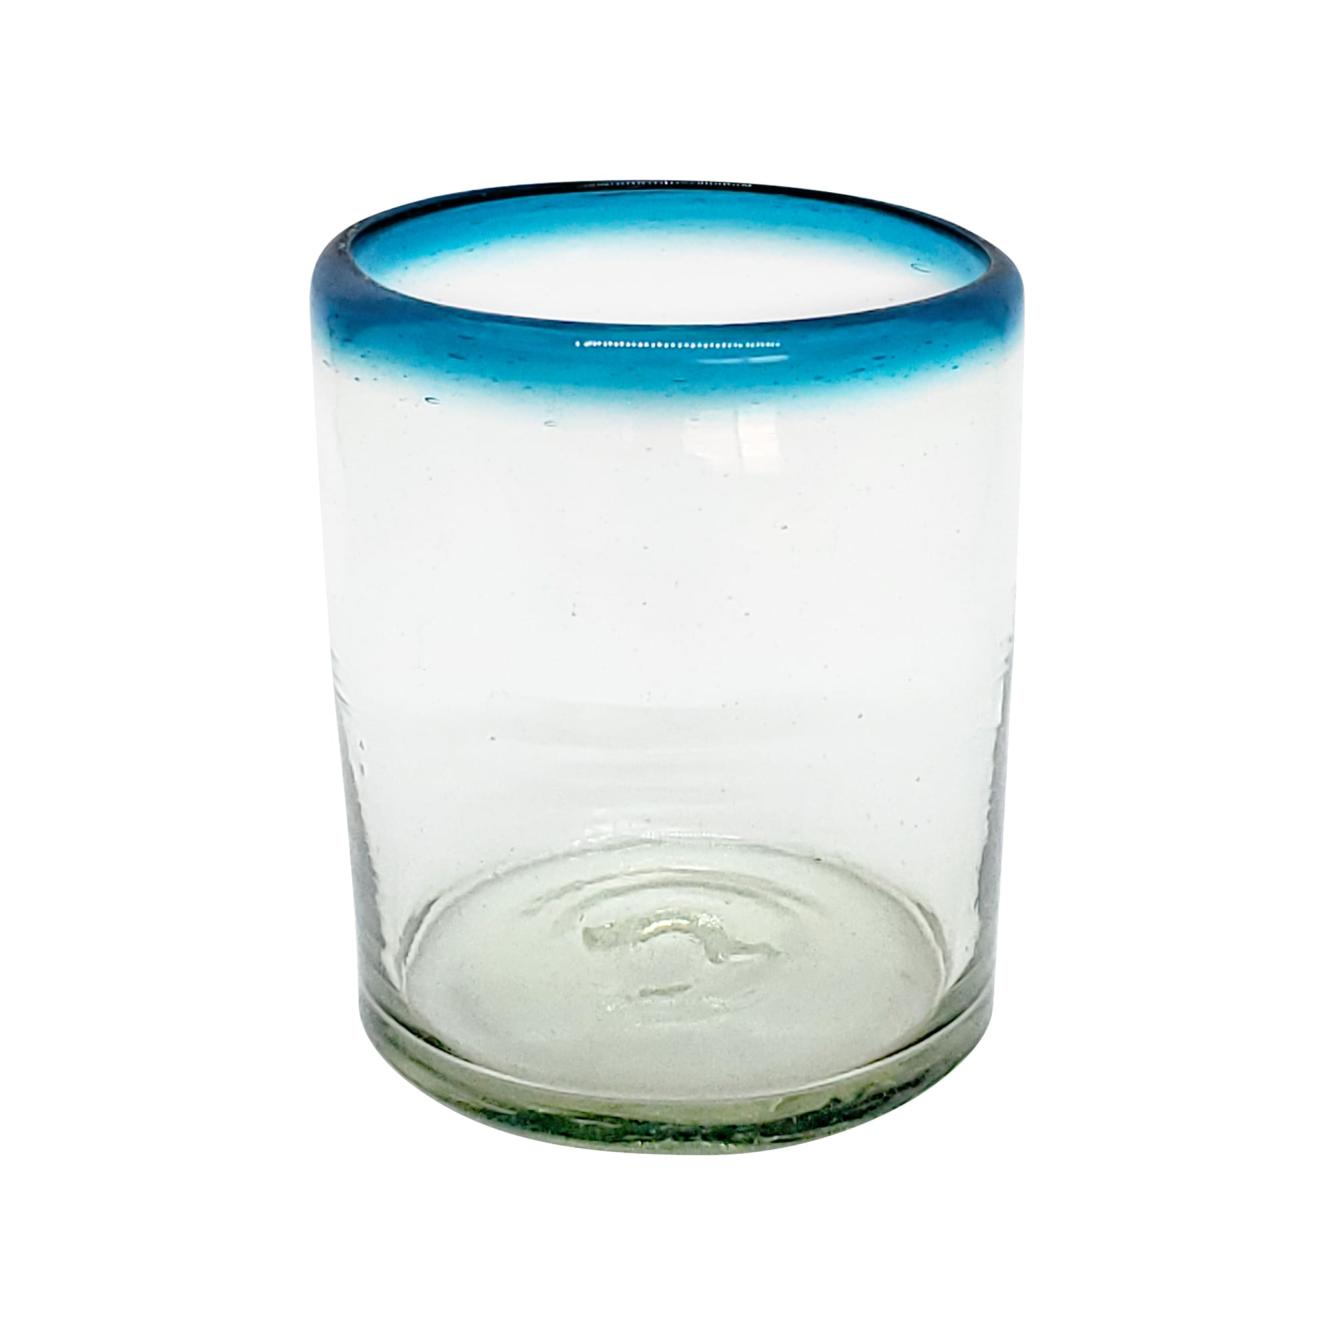 Sale Items / Aqua Blue Rim 10 oz Tumblers (set of 6) / These tumblers are a great complement for your pitcher and drinking glasses set.<br>1-Year Product Replacement in case of defects (glasses broken in dishwasher is considered a defect).